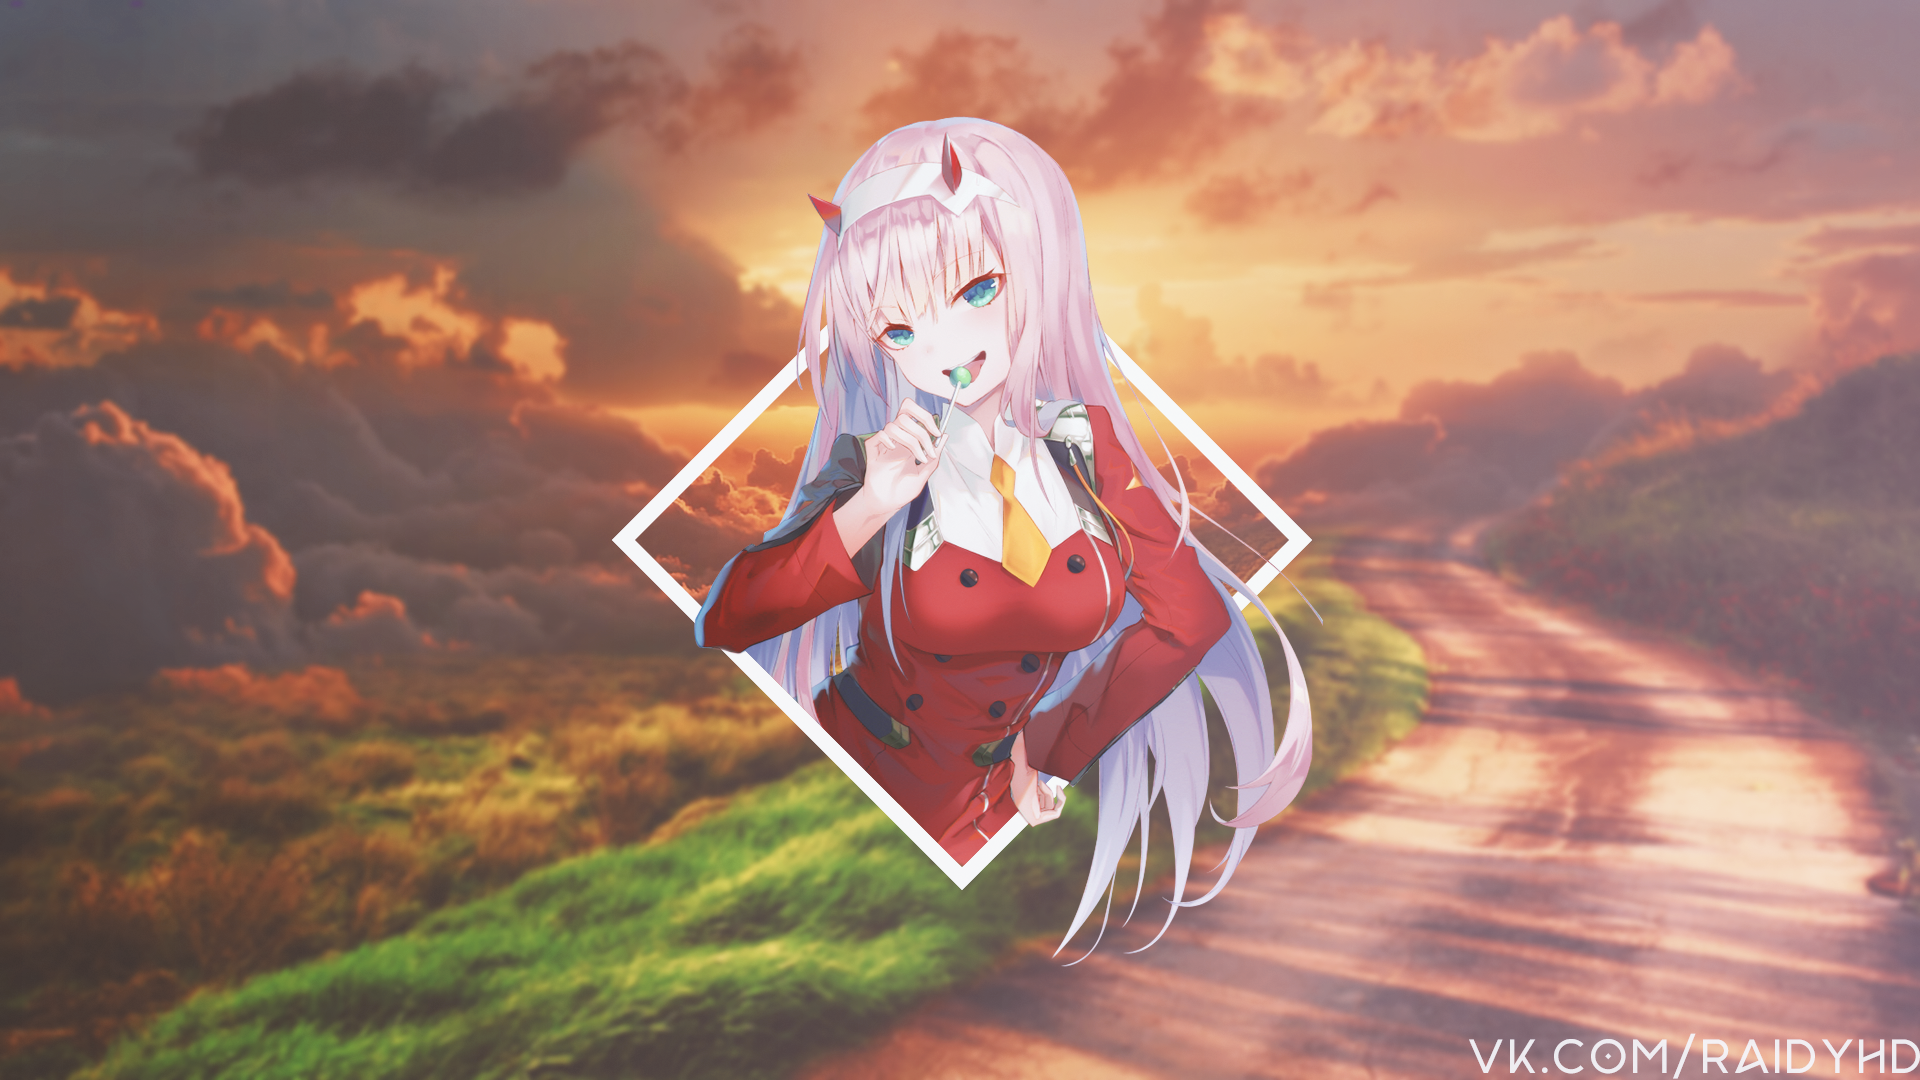 Anime 1920x1080 anime anime girls picture-in-picture Zero Two (Darling in the FranXX) Darling in the FranXX